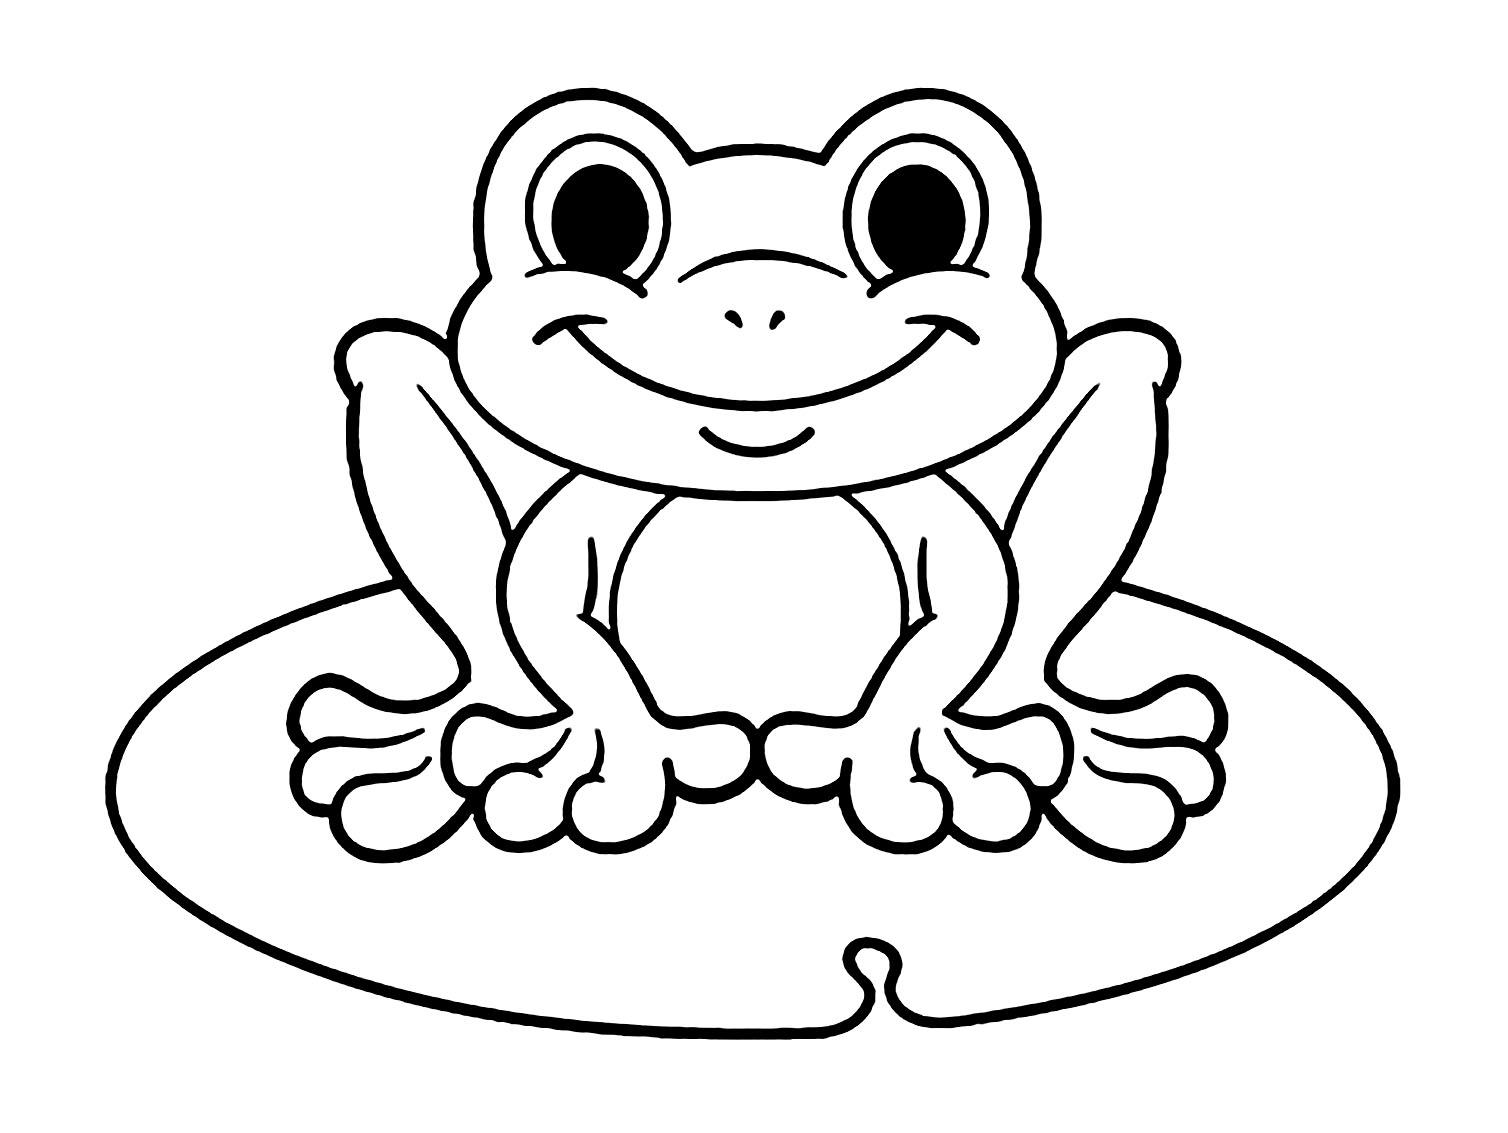 Frogs to print for free - Frogs Kids Coloring Pages